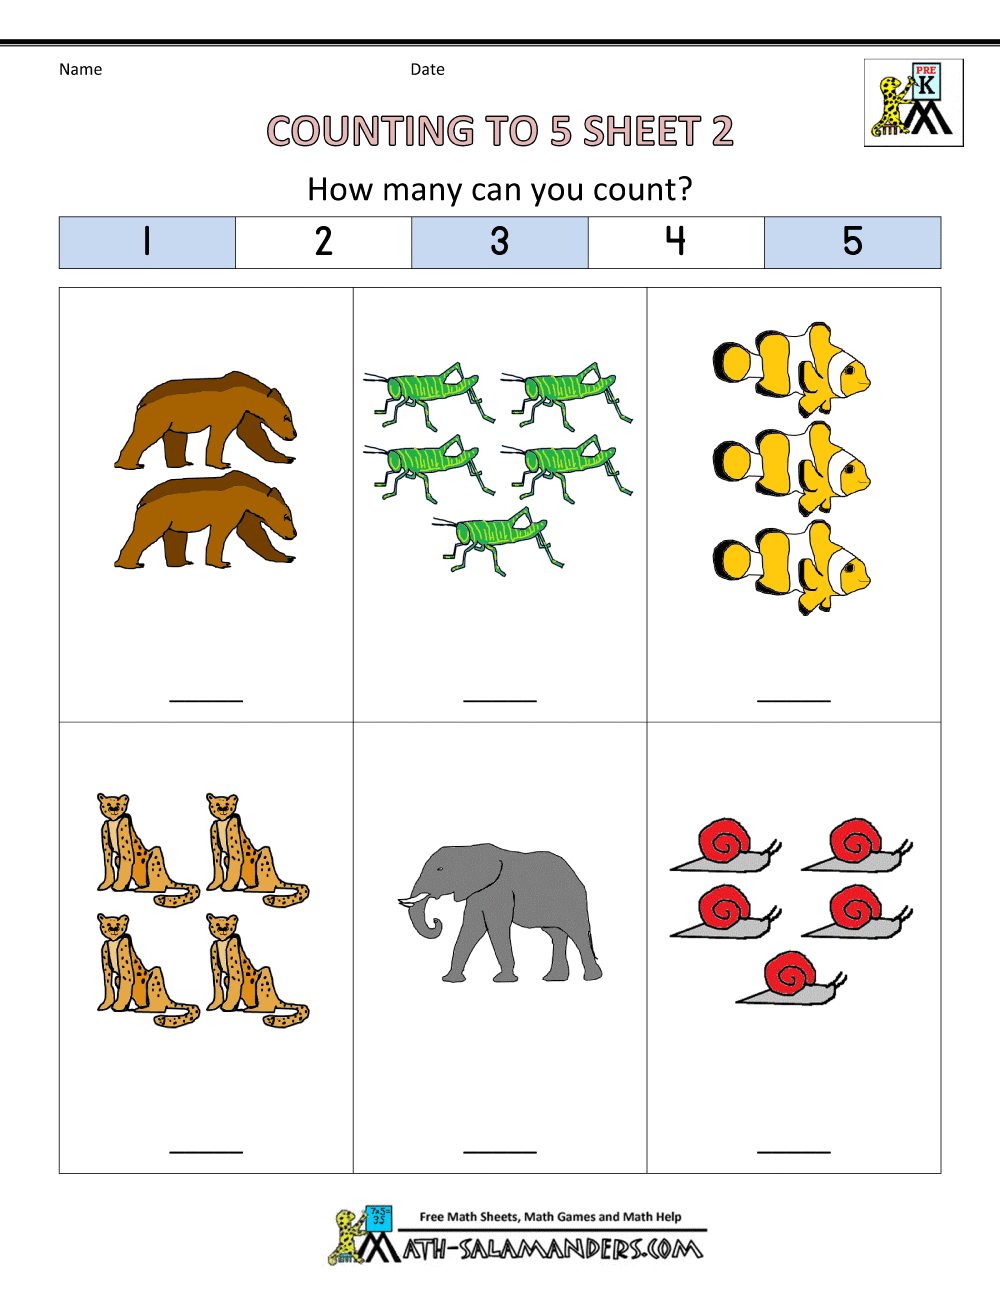 Preschool Counting Worksheets - Counting to 21 With Counting By 5s Worksheet